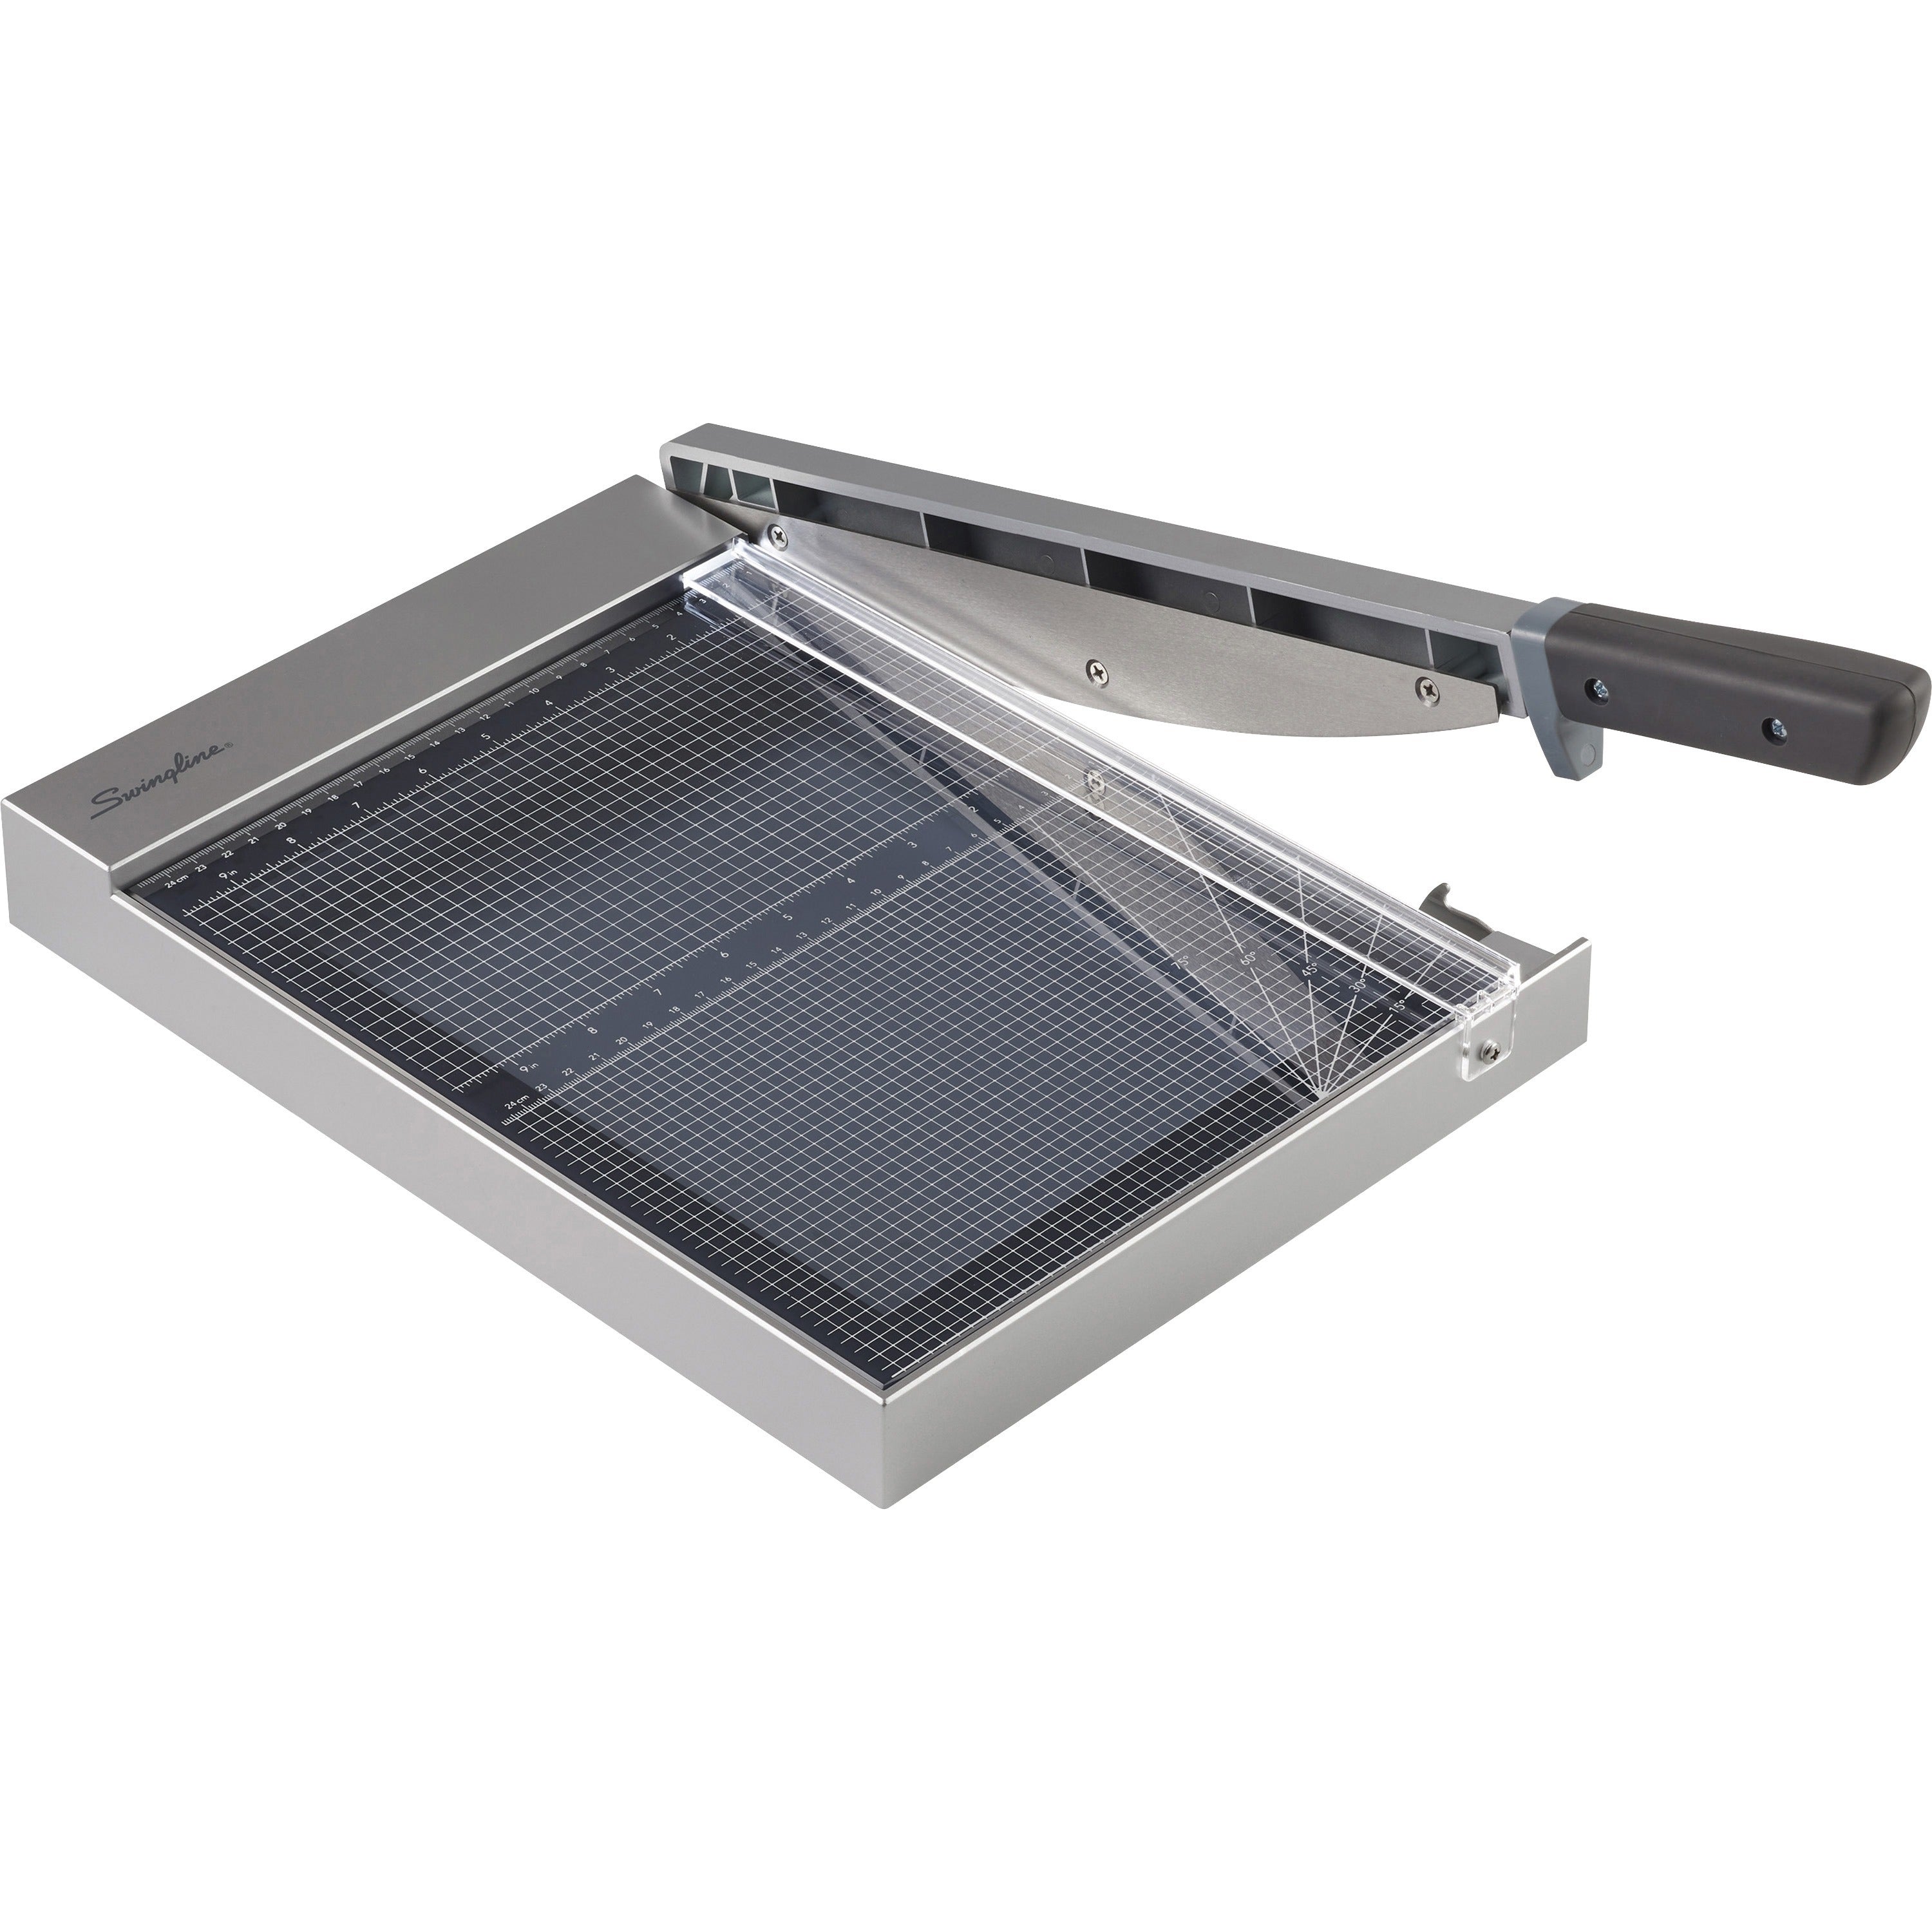 swingline-classiccut-guillotine-glass-trimmer-15-sheet-cutting-capacity-12-cutting-length-safety-latch-tempered-glass-gray-1-each_swi10013 - 1